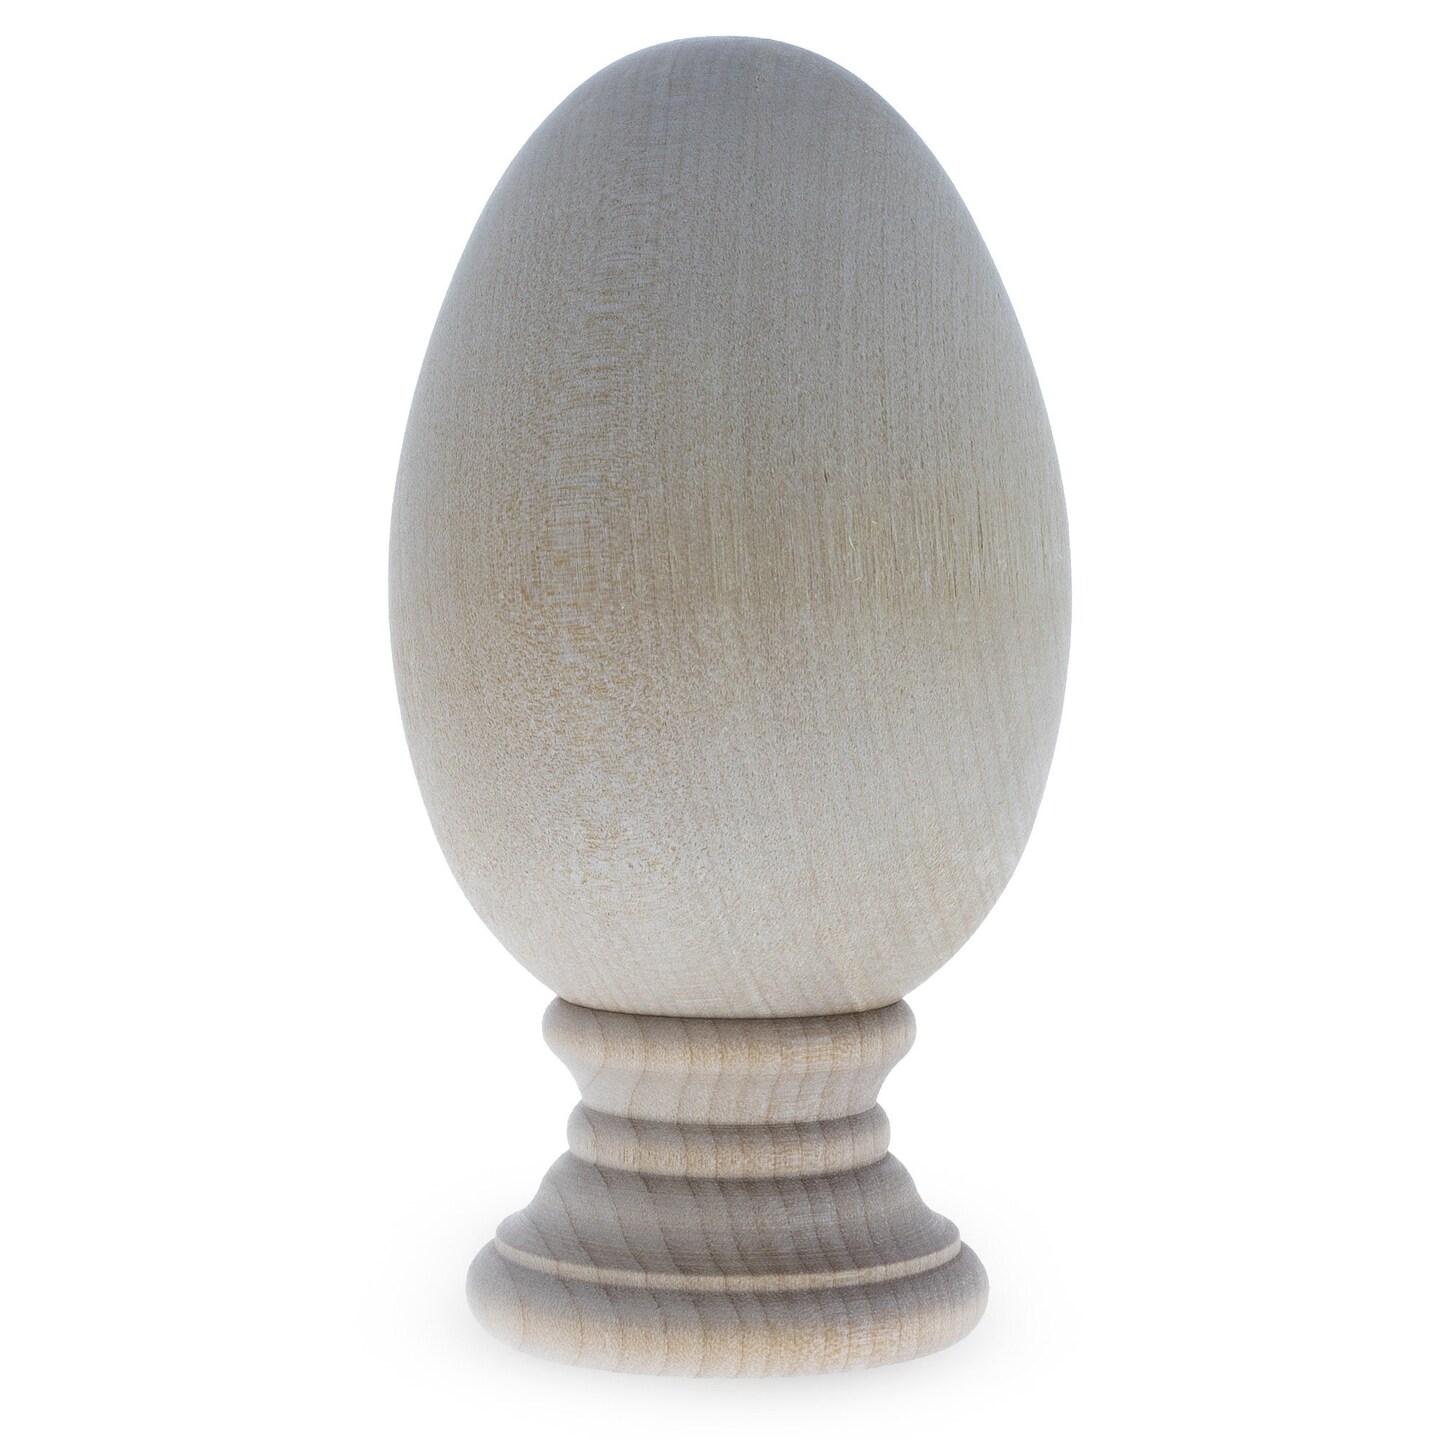 Unfinished Blank Wooden Egg with Detachable Stand 3.25 Inches